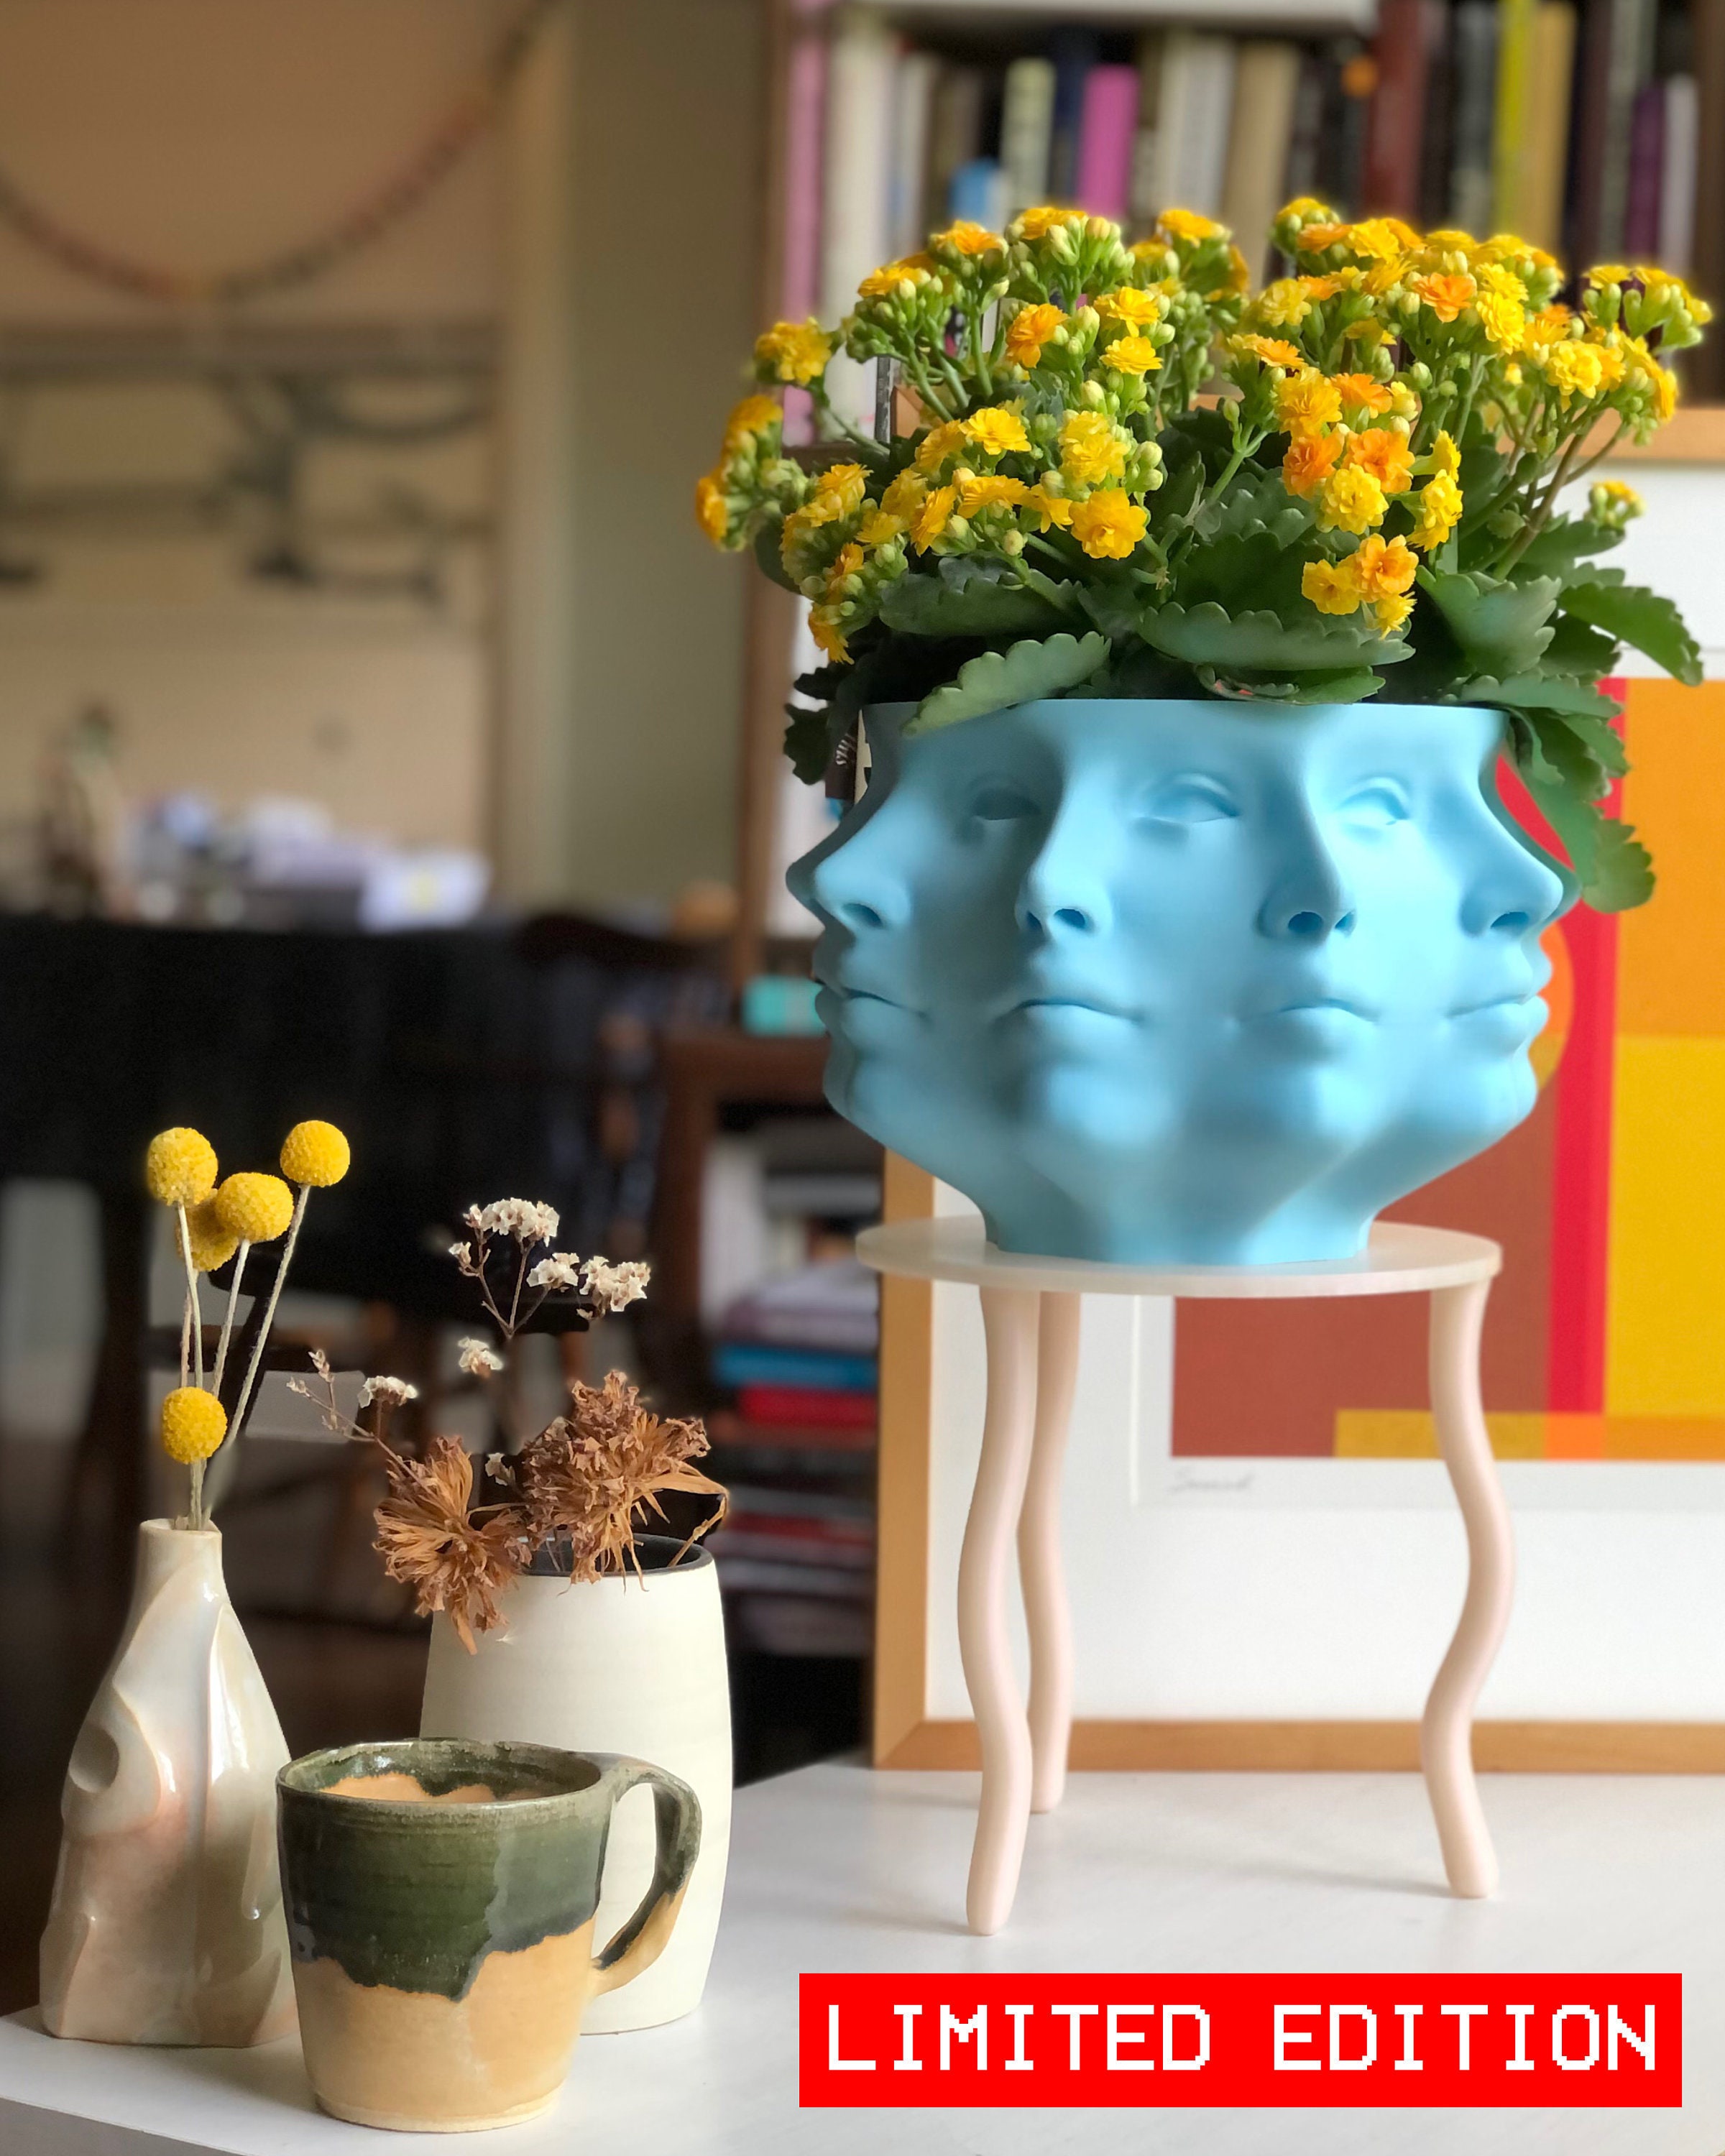 3D Printed Polyface Planter | Etsy